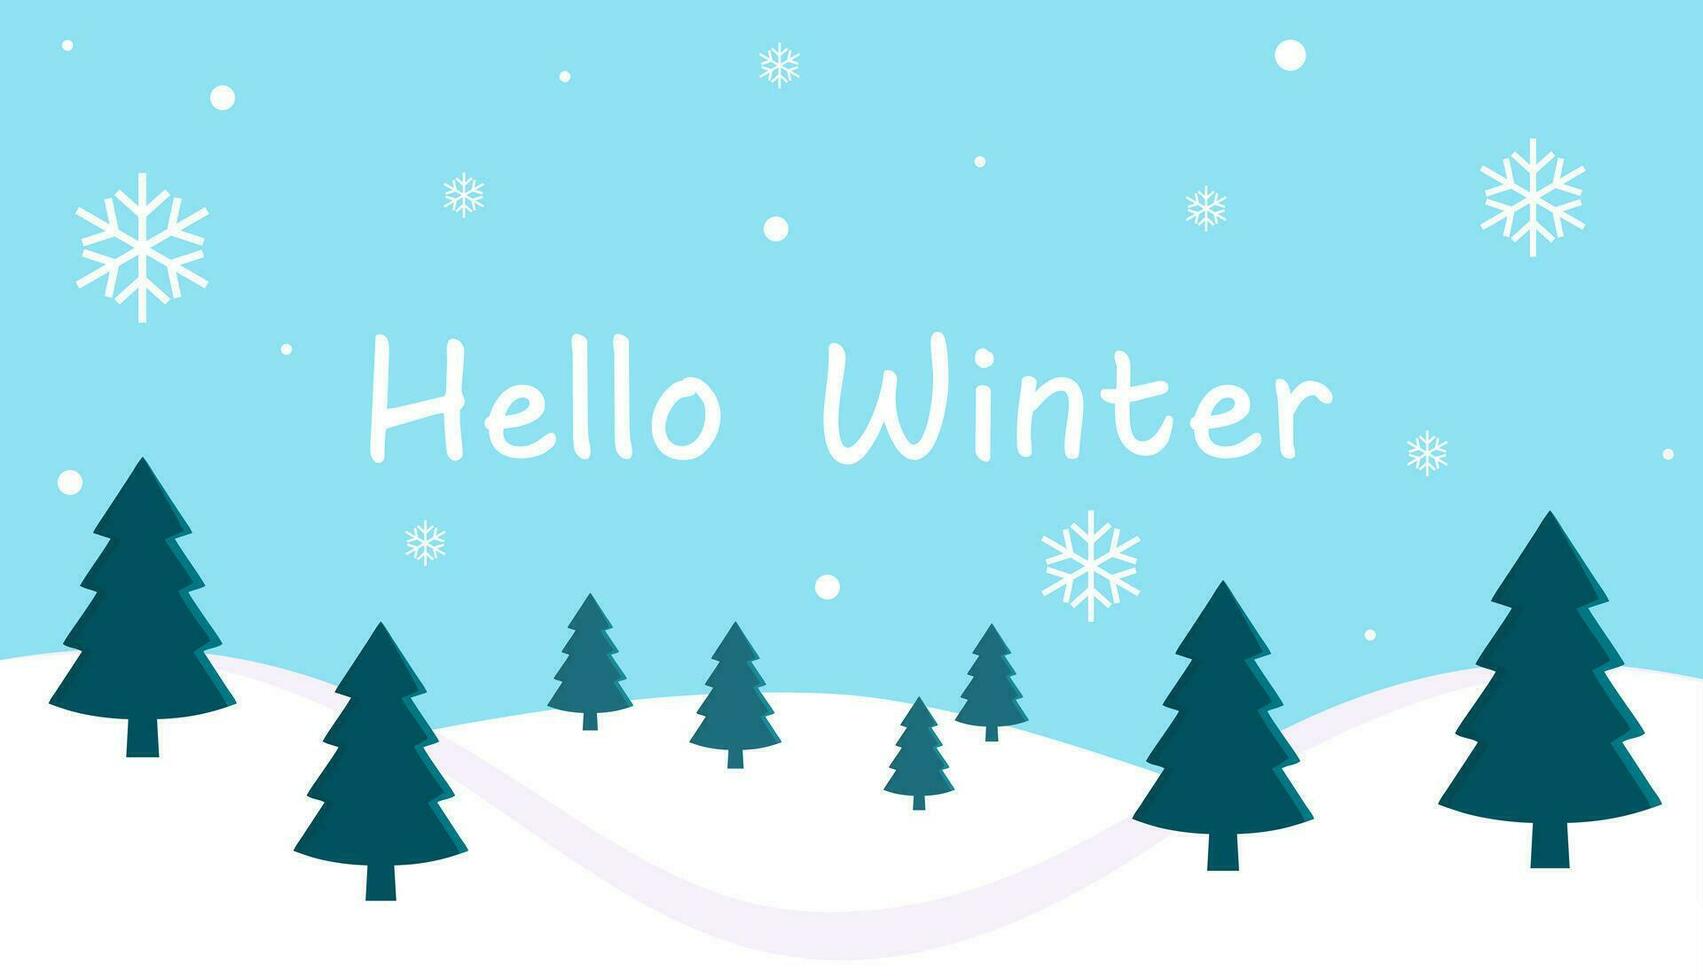 Hello winter, a blue background with snowflakes and trees, winter vector background, wallpaper illustrations with winter snow theme